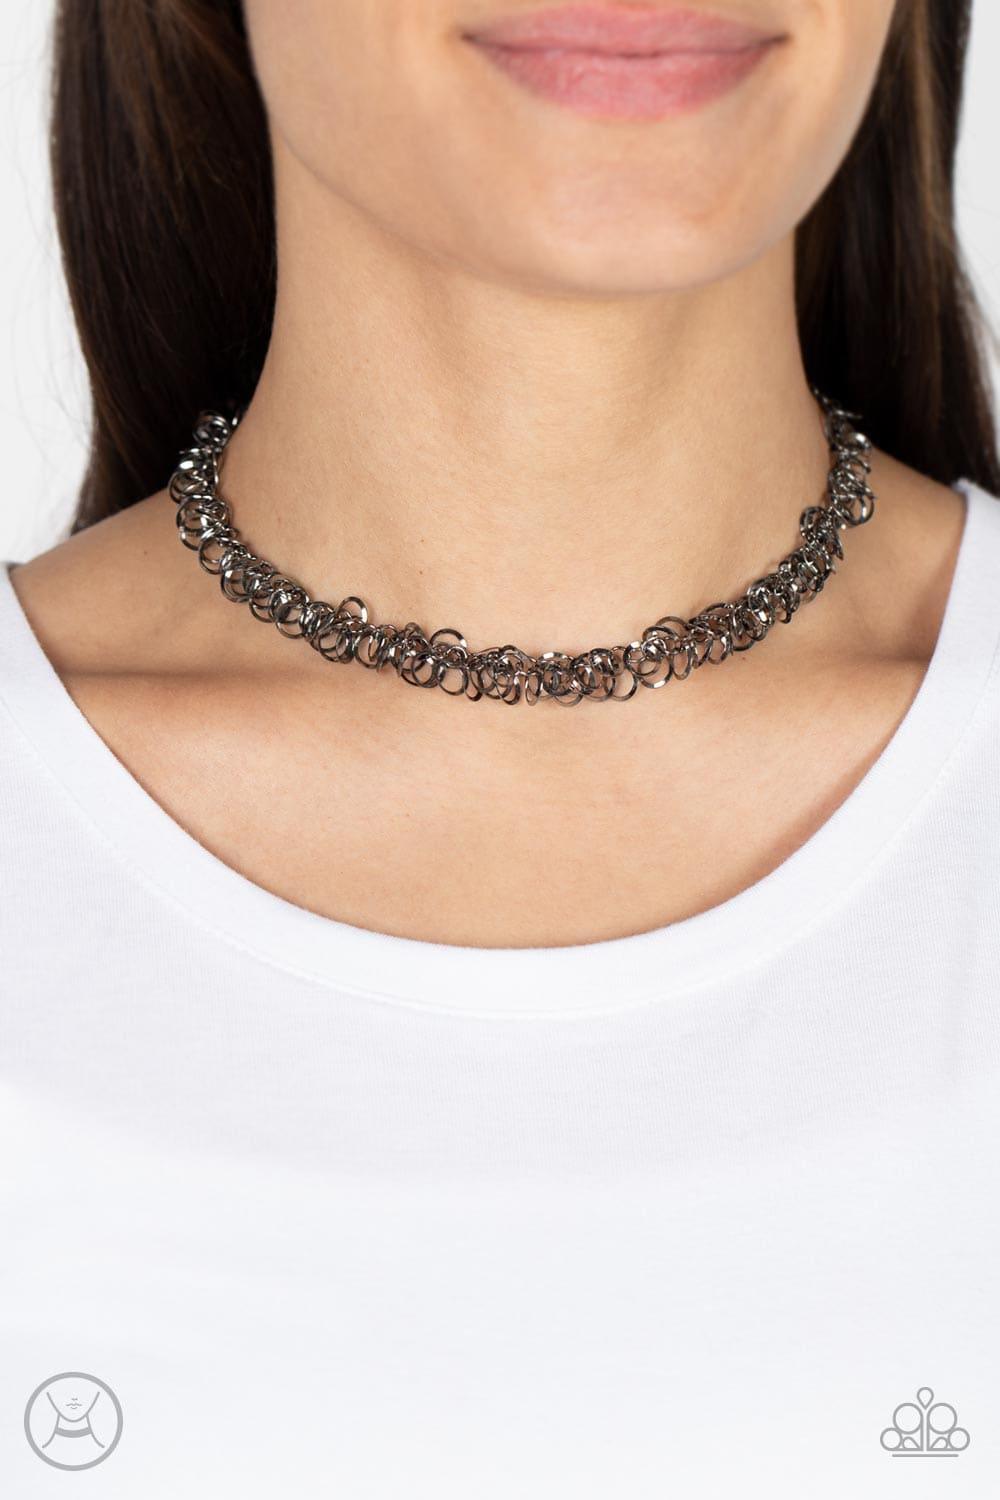 Paparazzi Accessories - Cause a Commotion - Black Choker Necklace - Bling by JessieK